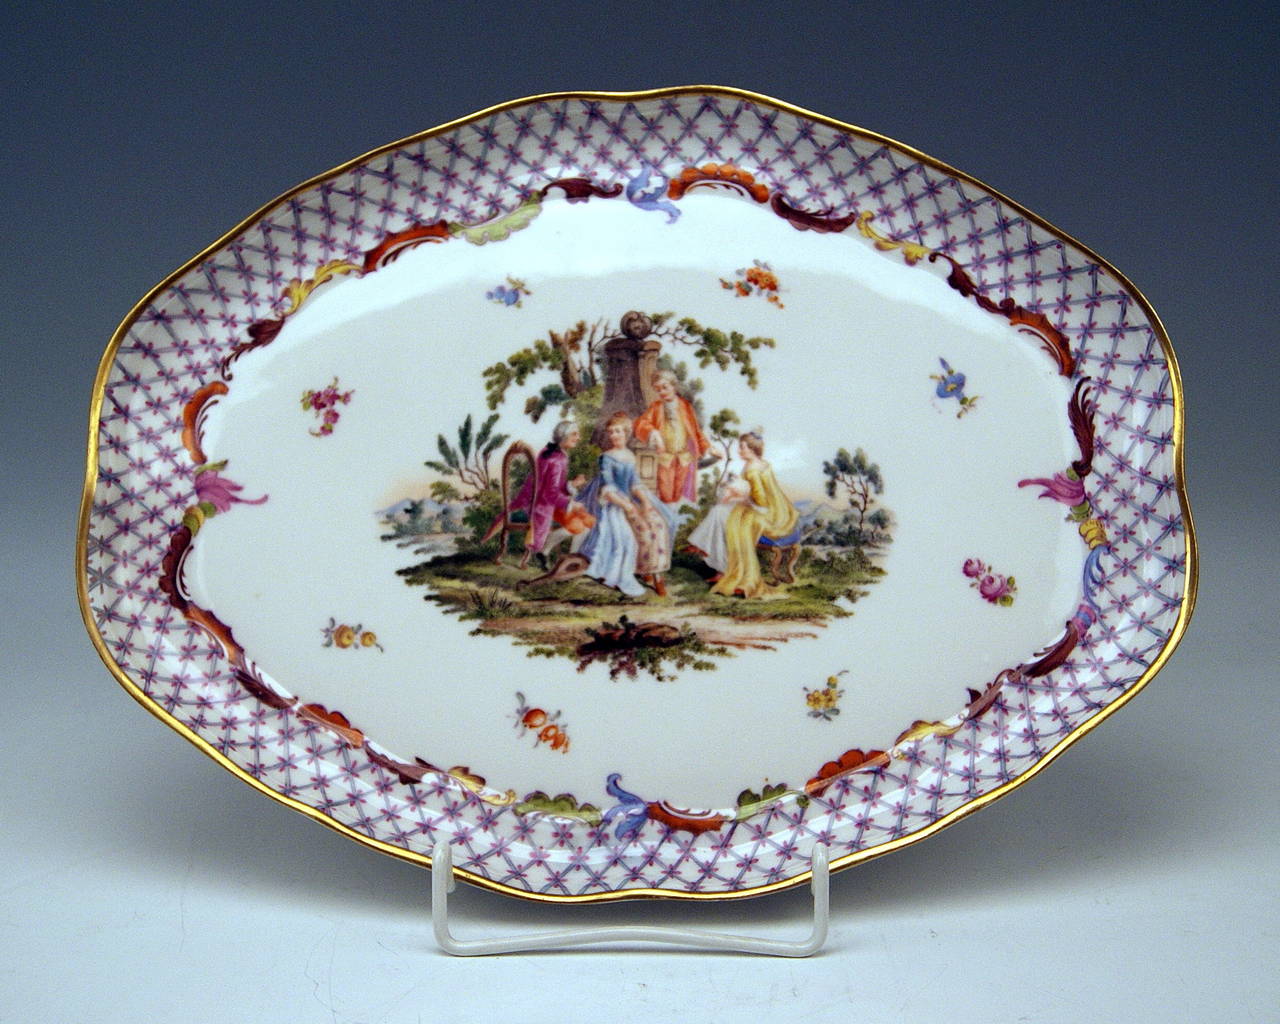 We  invite you here to look at a  splendid Meissen Dejeuner  /  Mocha Set for two persons: 

This mocha set is of  FINEST APPEARANCE  due to gorgeous paintings of WATTEAU TYPE: Gallant Noblemen and noble ladies surrounded by idyllic / bucolic